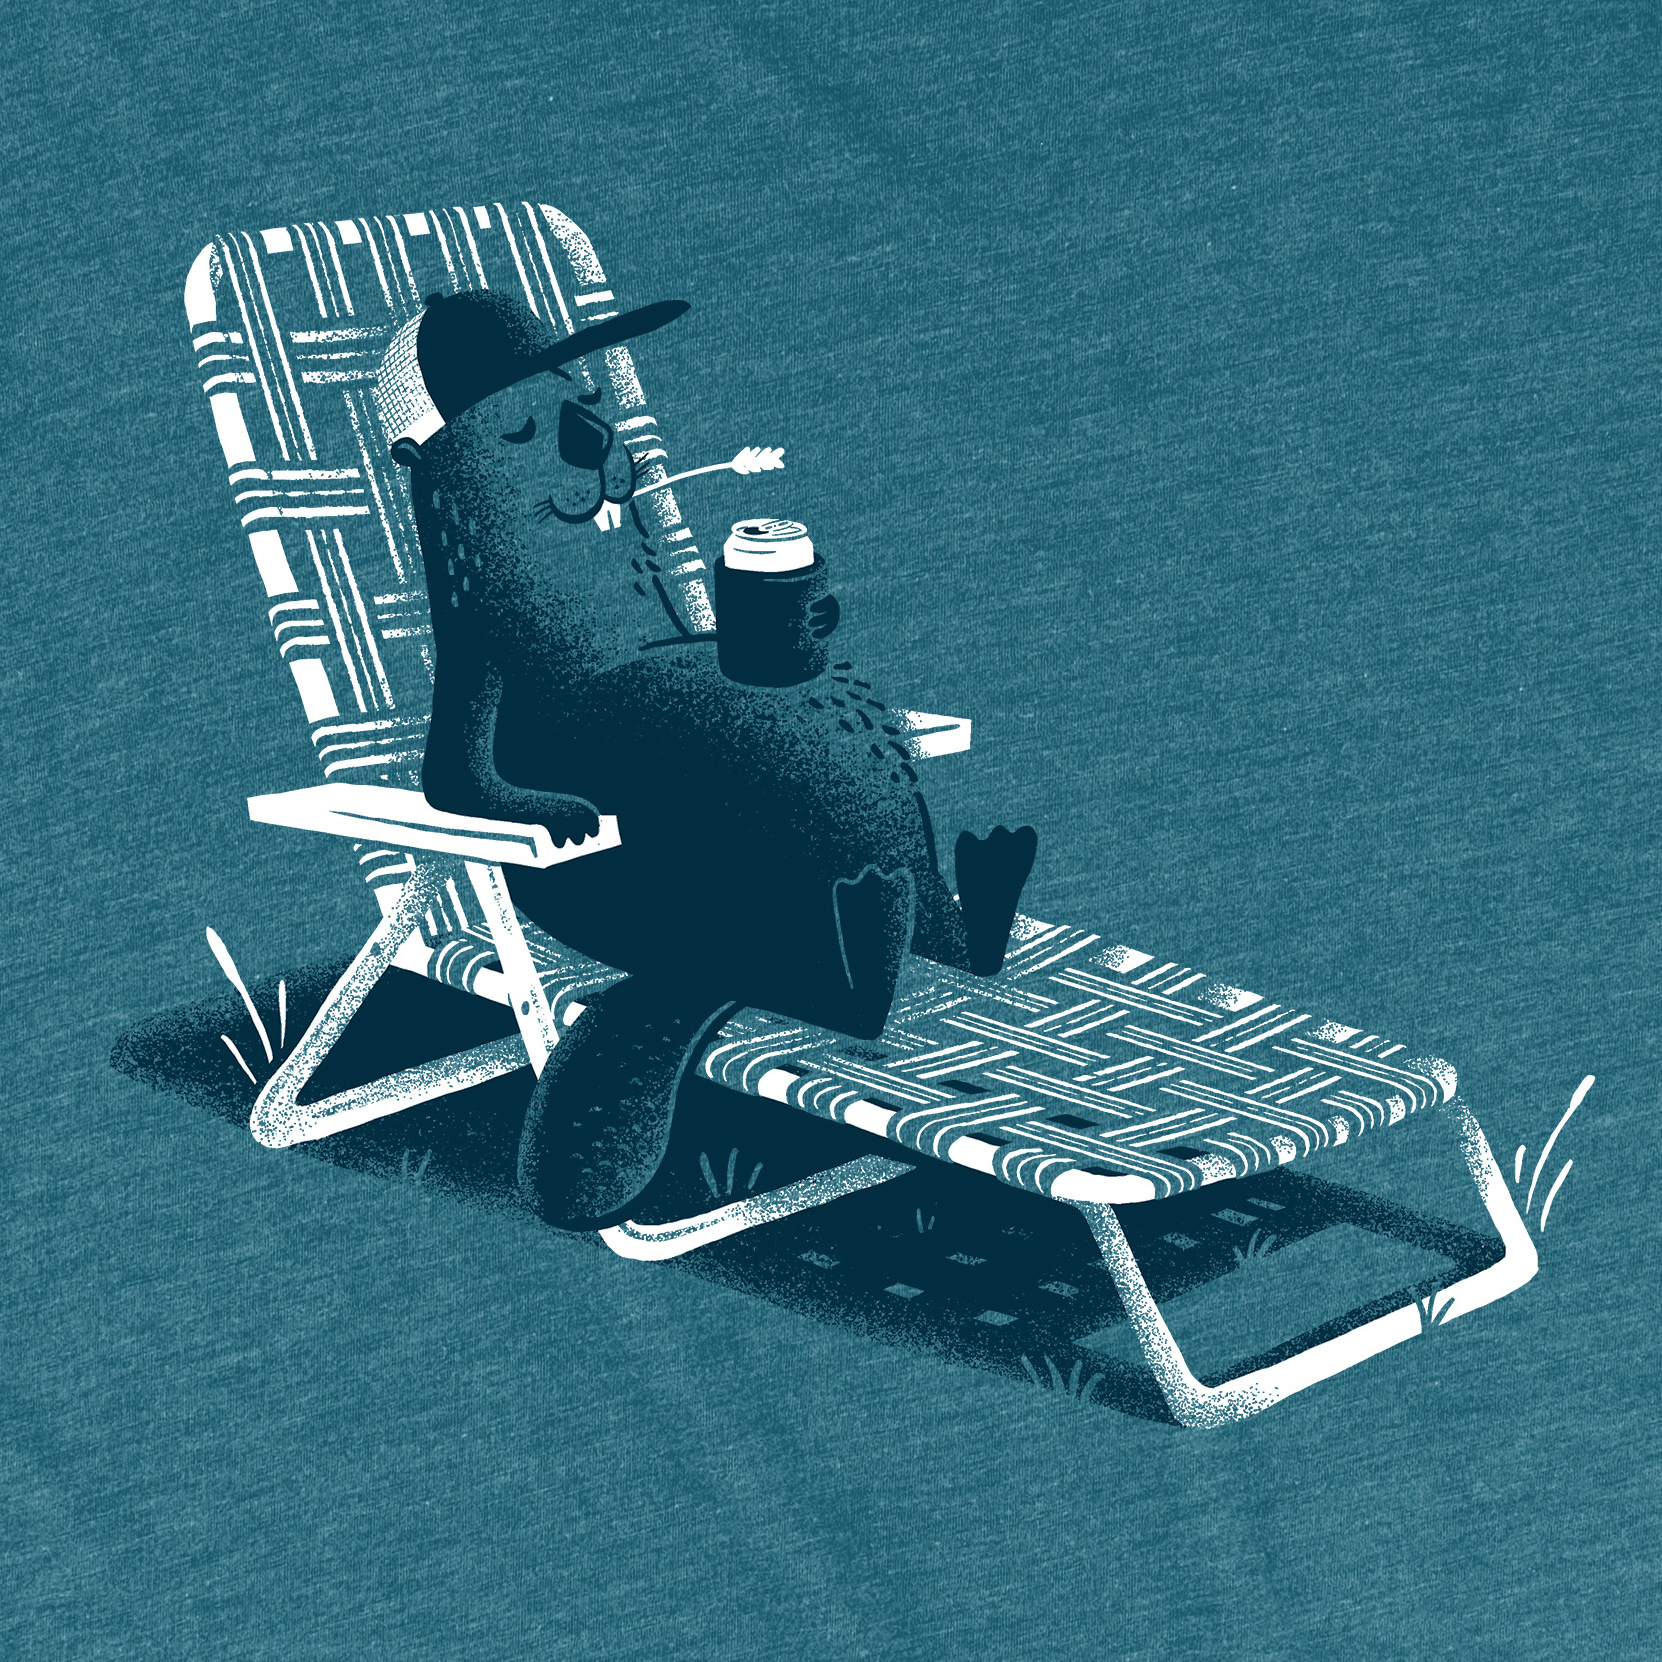 Detail of steel blue tee of beaver in a lawnchair drinking a beer or soda. 